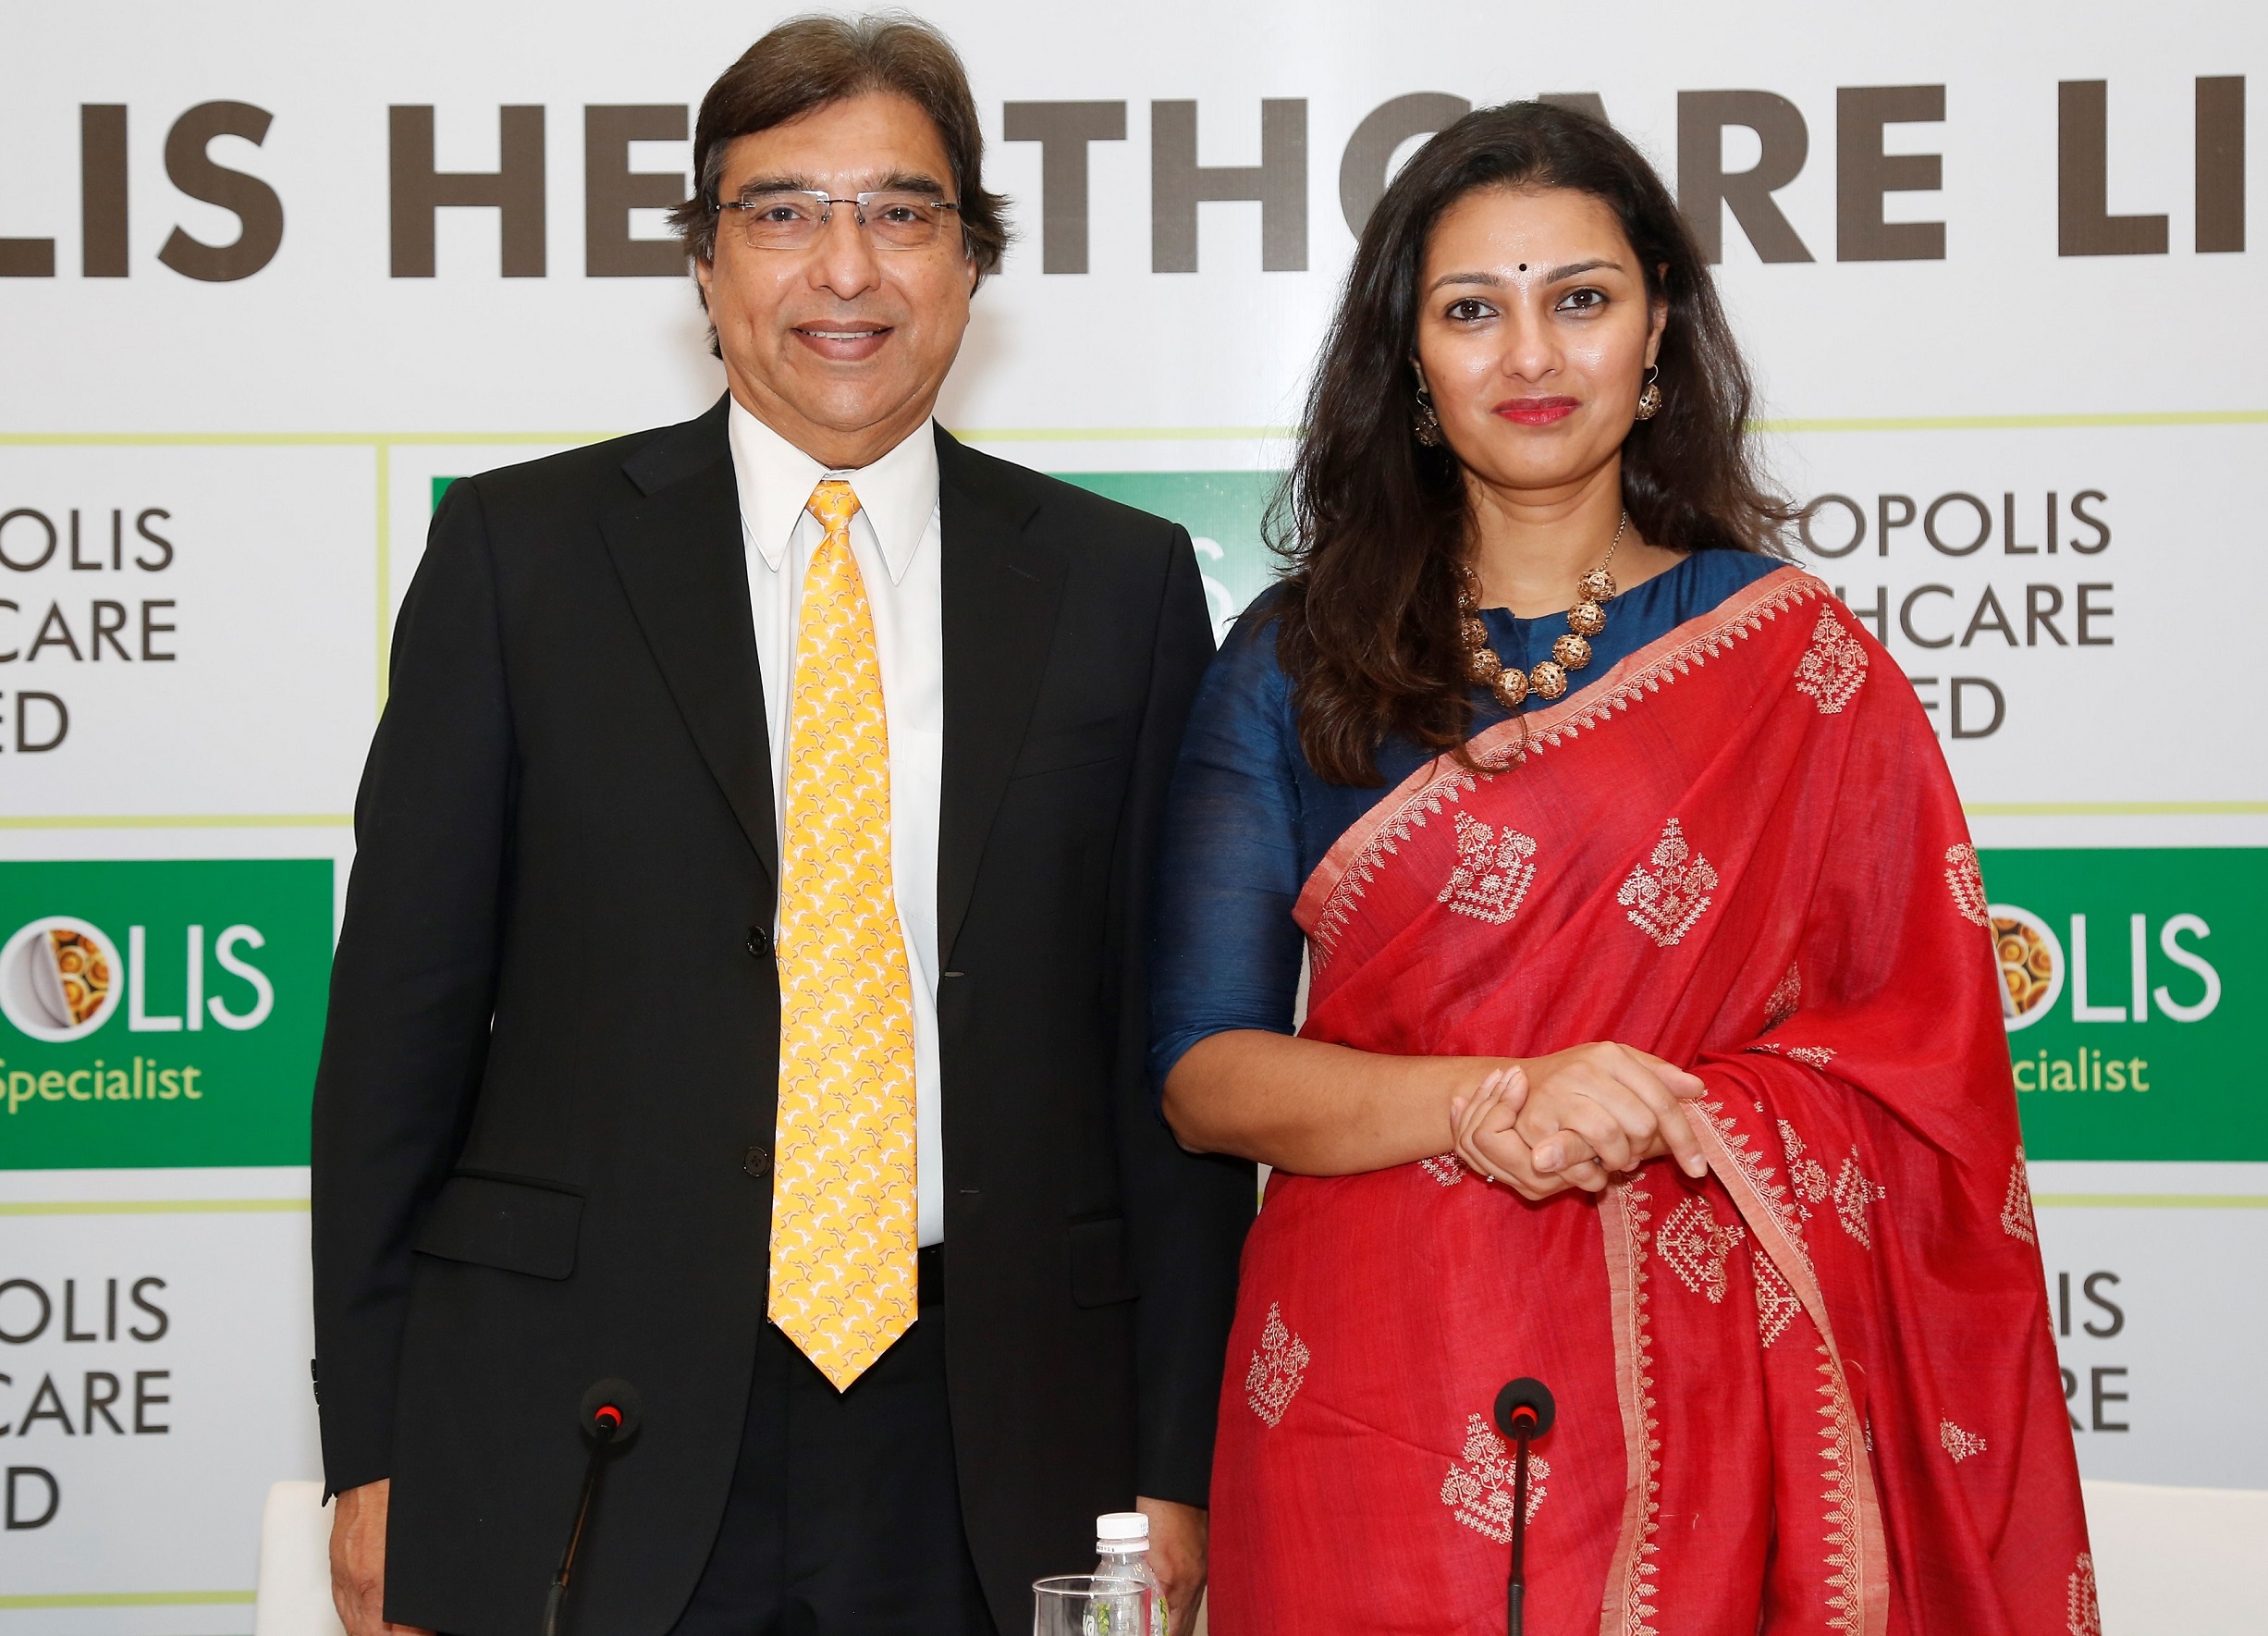 Dr Sushil Shah, Chairman and Ms Ameera Shah, Managing Director from Metropolis Healthcare Ltd at the press conference in Mumbai to announce the company's forthcoming IPO. 